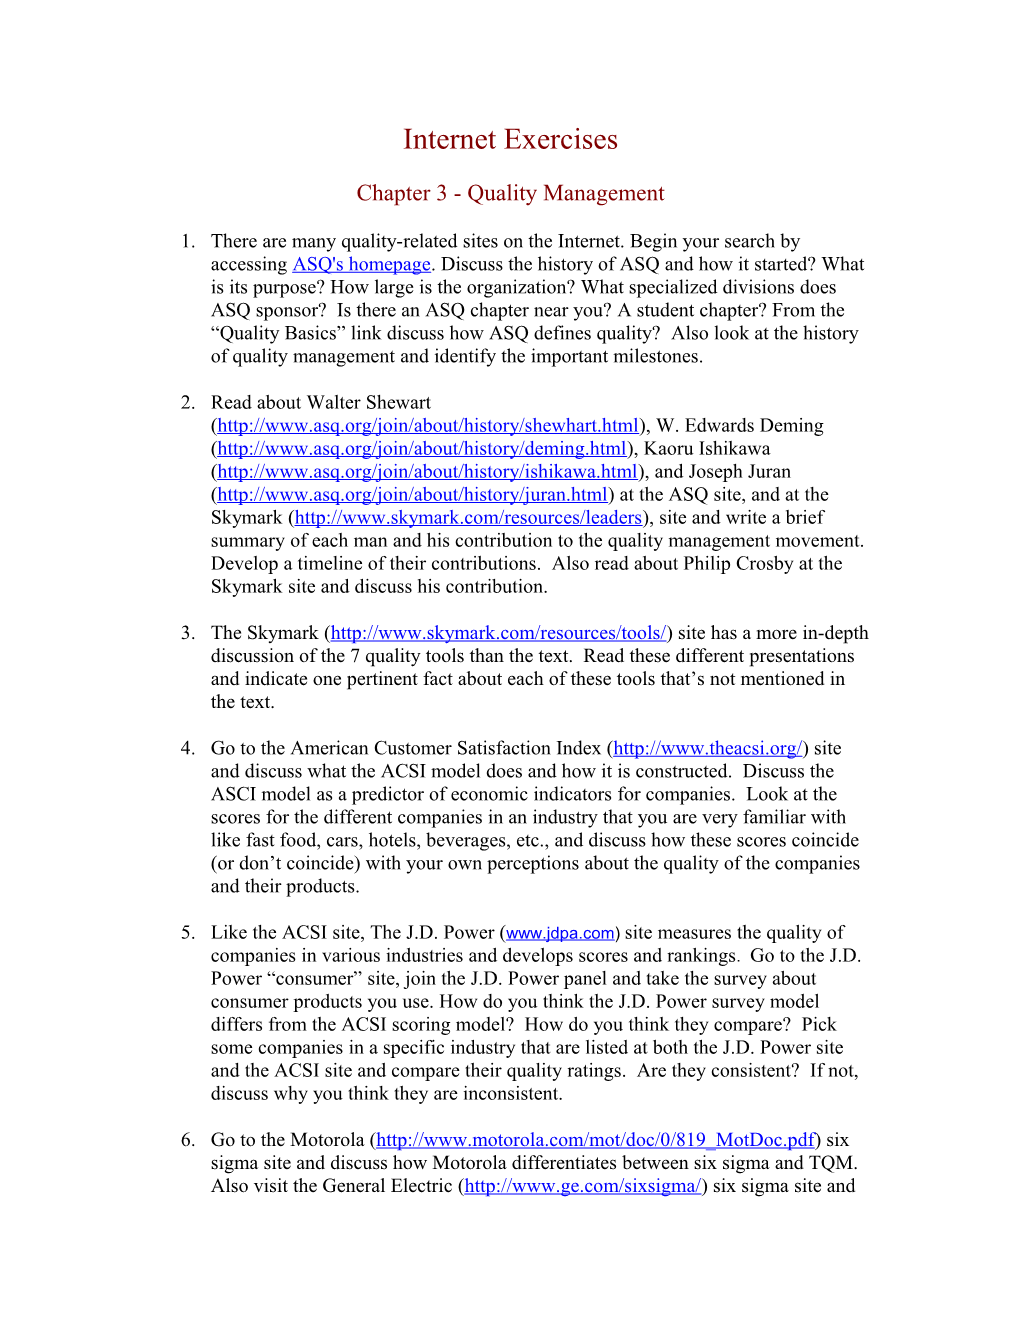 Chapter 3 - Quality Management